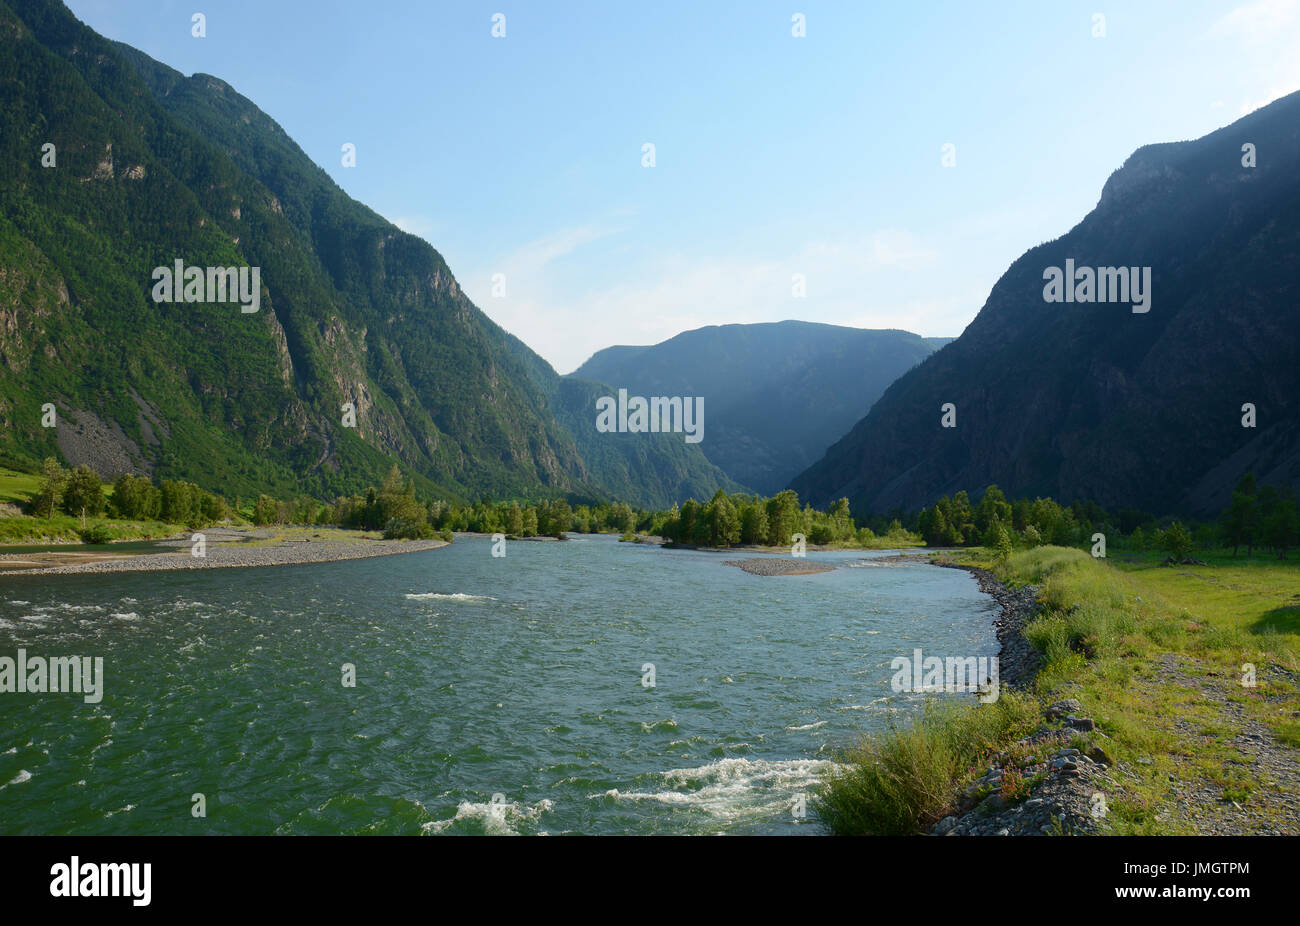 Bashkaus River Flows Between Hills In Altai Mountains Altay Republic Siberia Russia Stock Photo Alamy